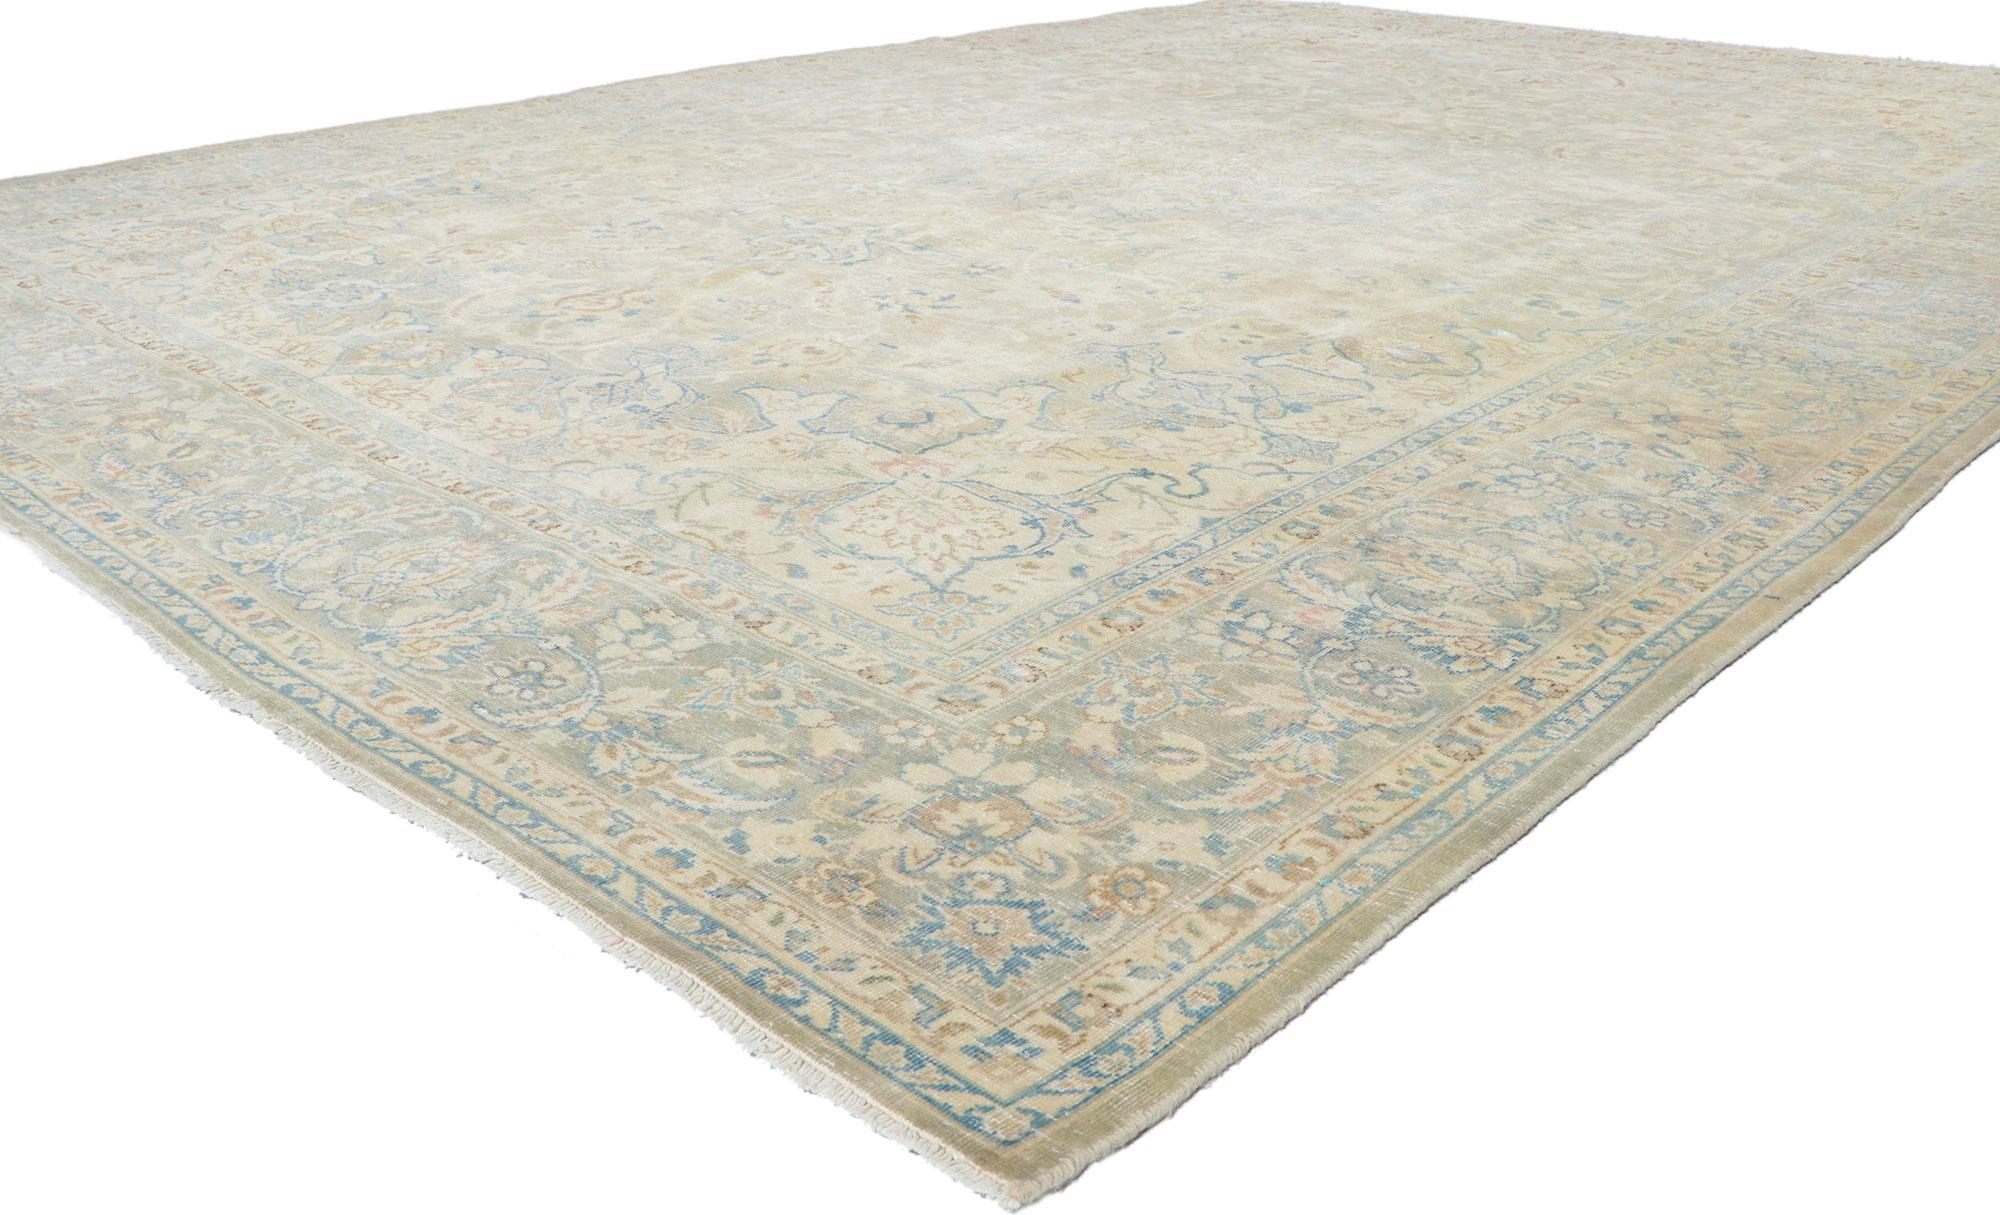 61129 Distressed Vintage Persian Kashan Rug, 09'00 x 12'09.

In the realm of time-honored elegance, this hand-knotted wool vintage Persian Kashan rug emerges as a tribute to the venerable legacy of ancient craftsmanship. Evoking the spirit of bygone